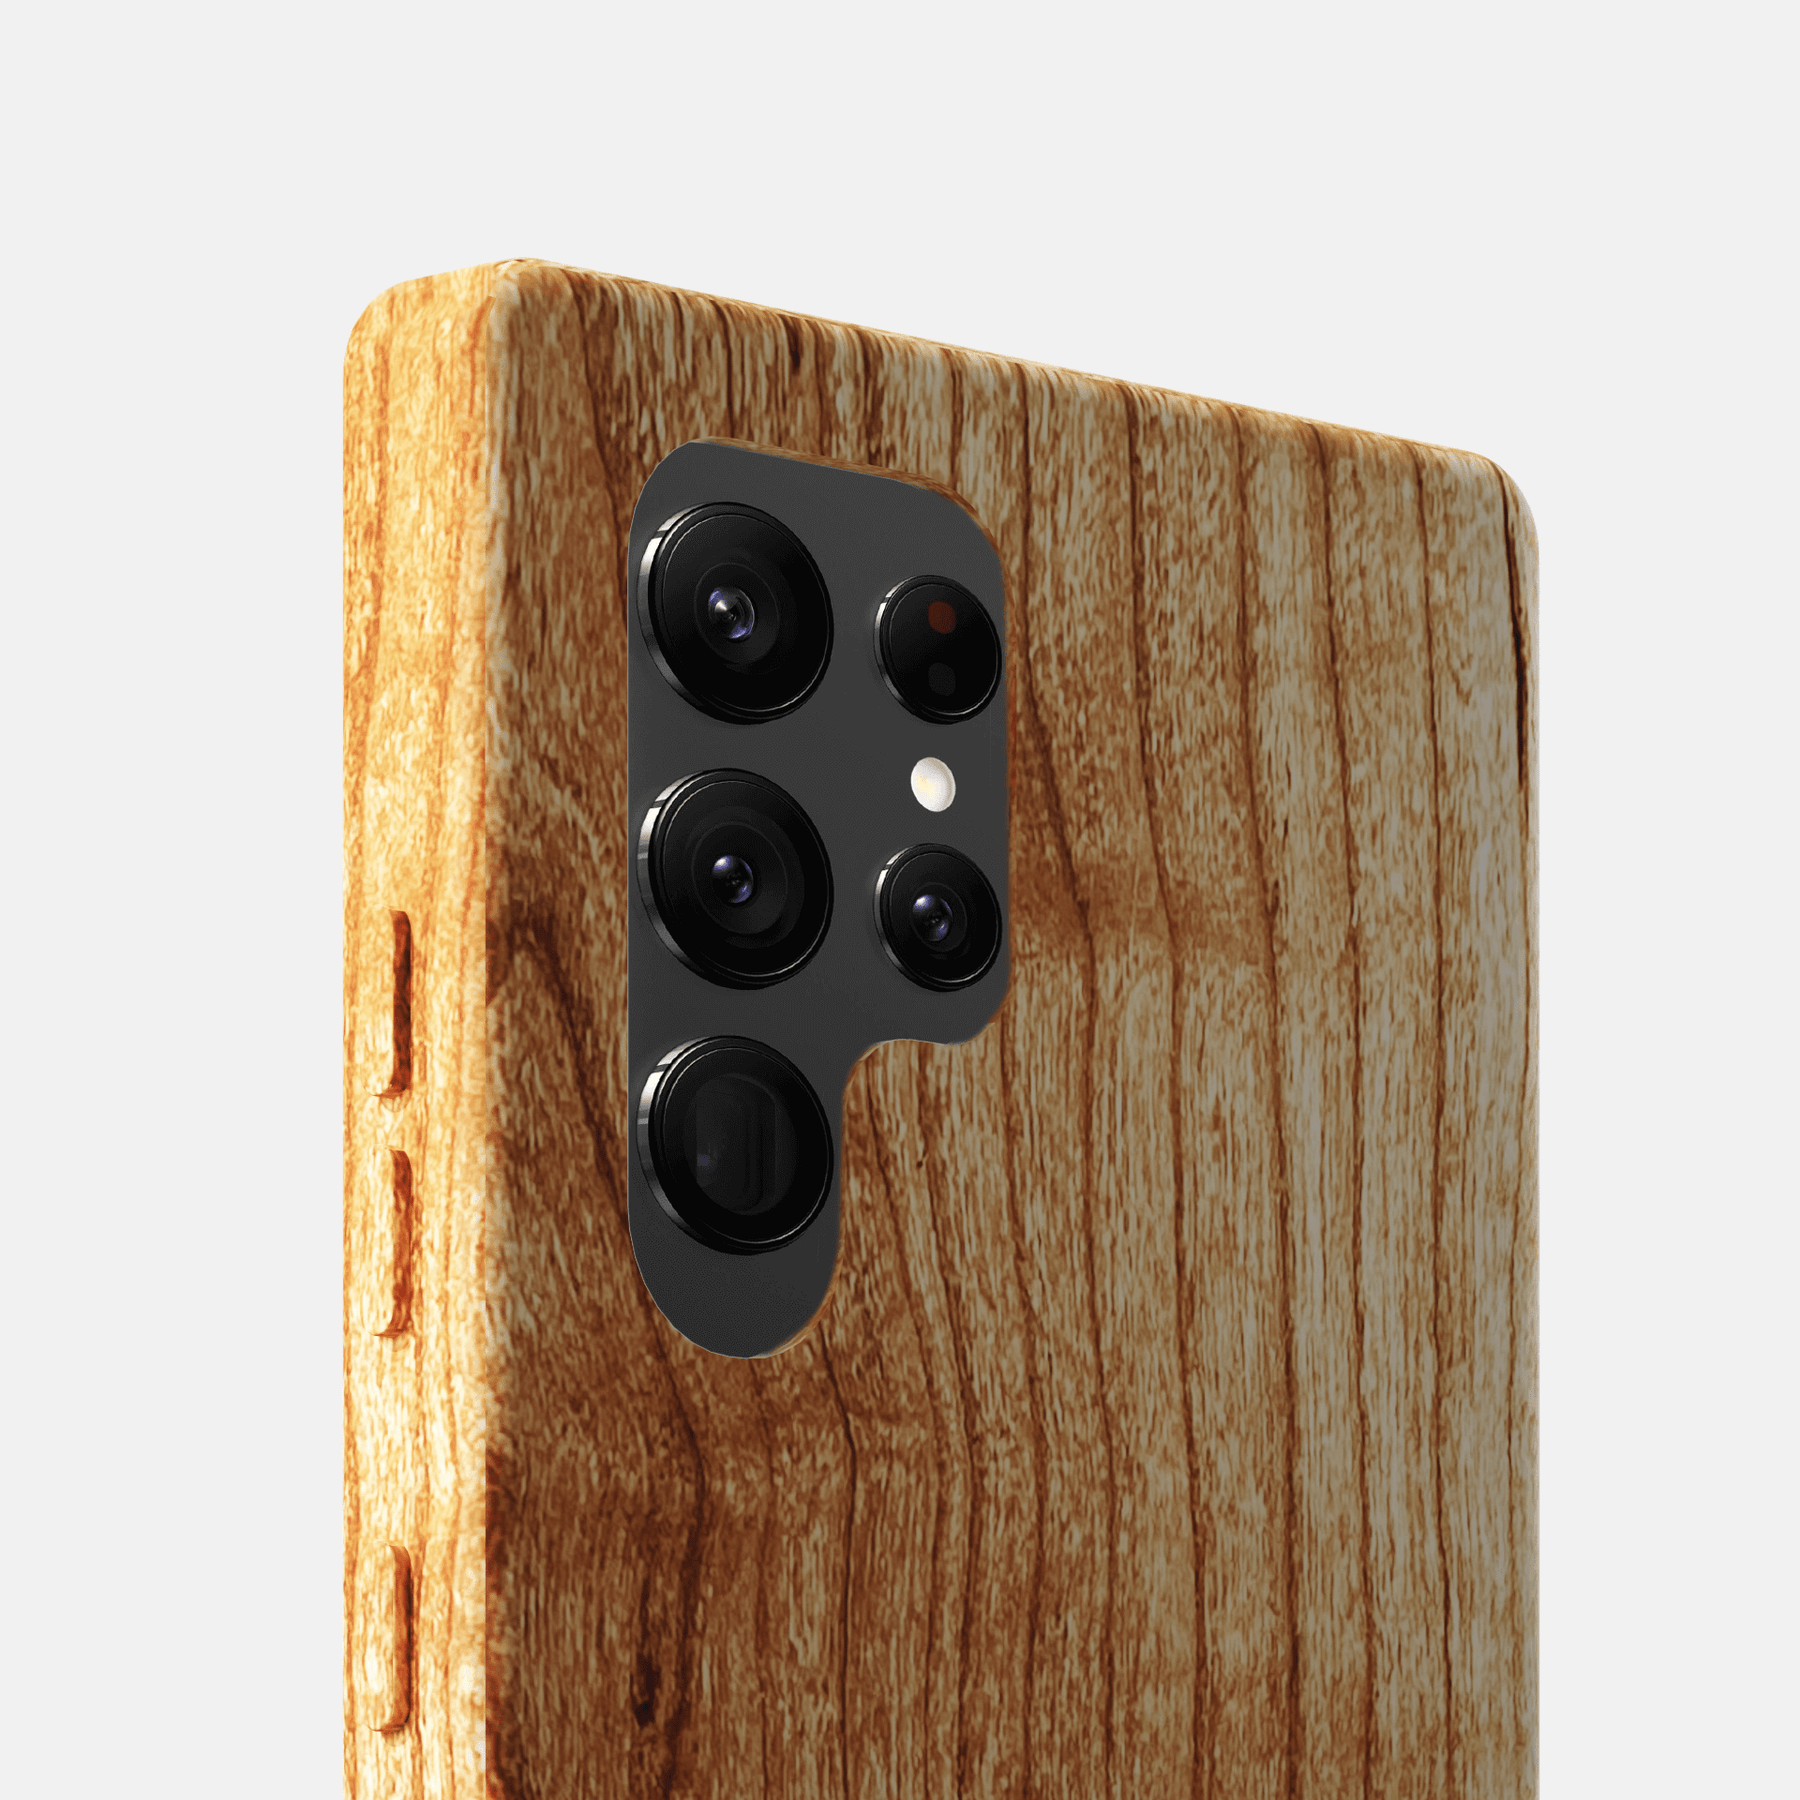 Real wood covers for Note 20 & Note 20 Ultra, Toast